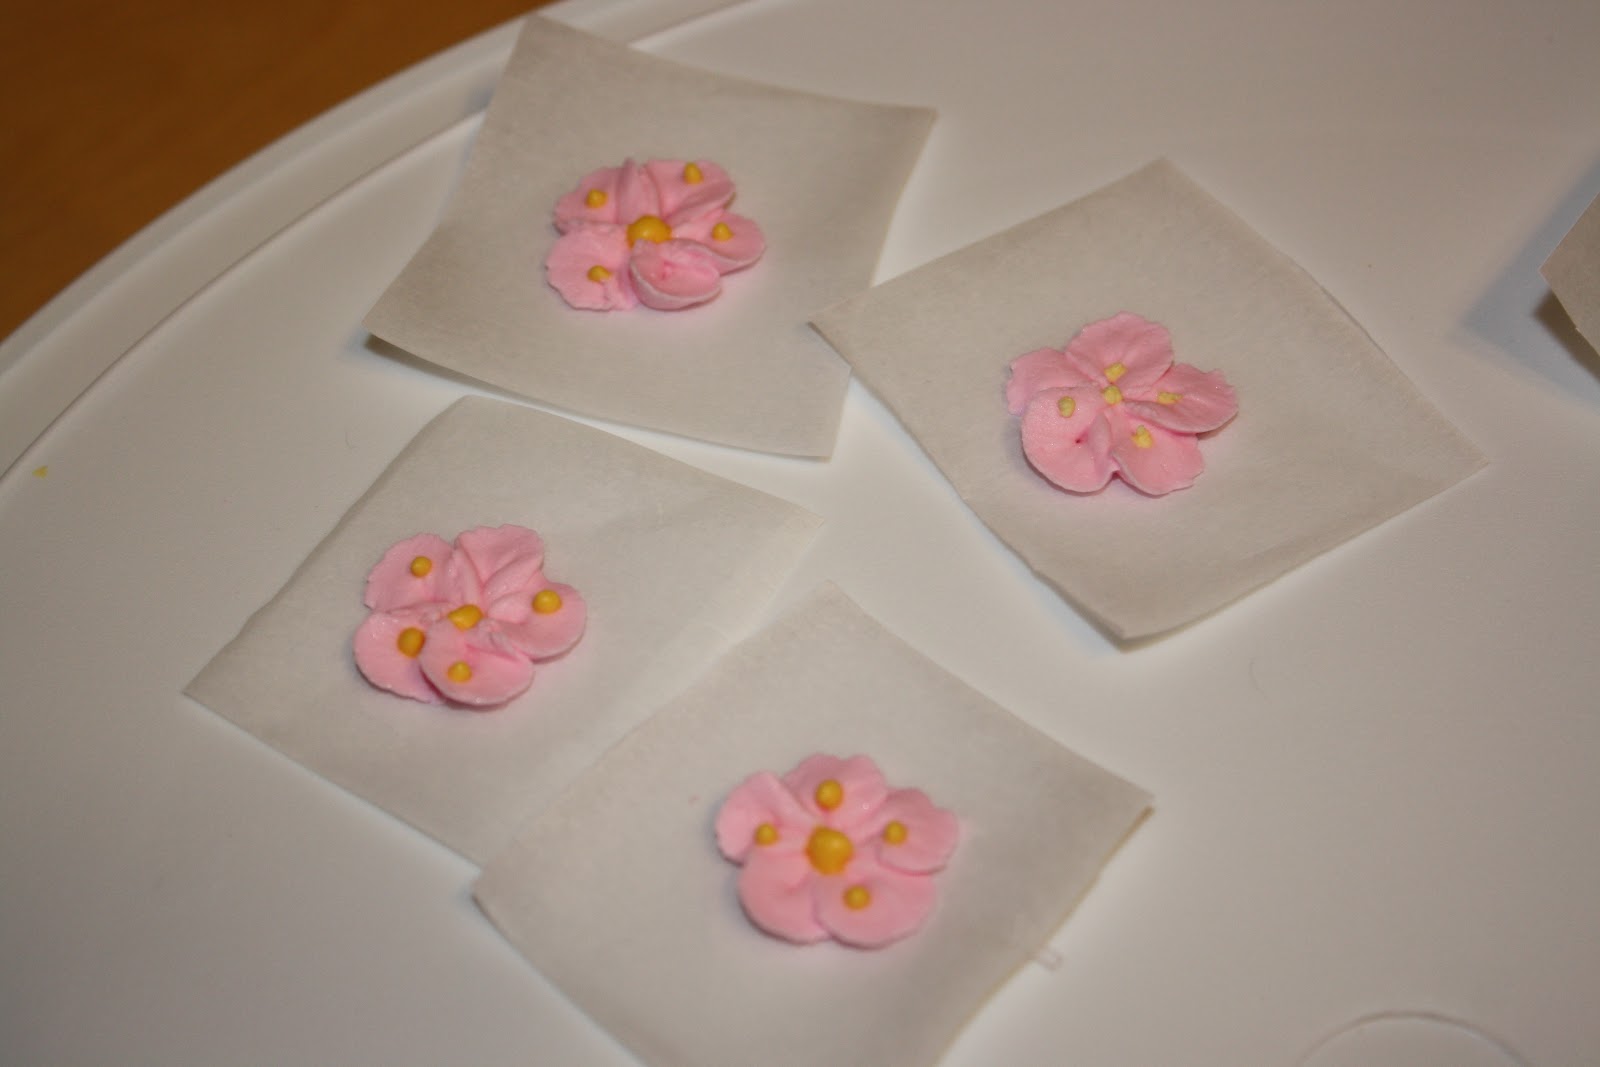 You Want Me to Cook?: Flowers and Cake Design – Class #2